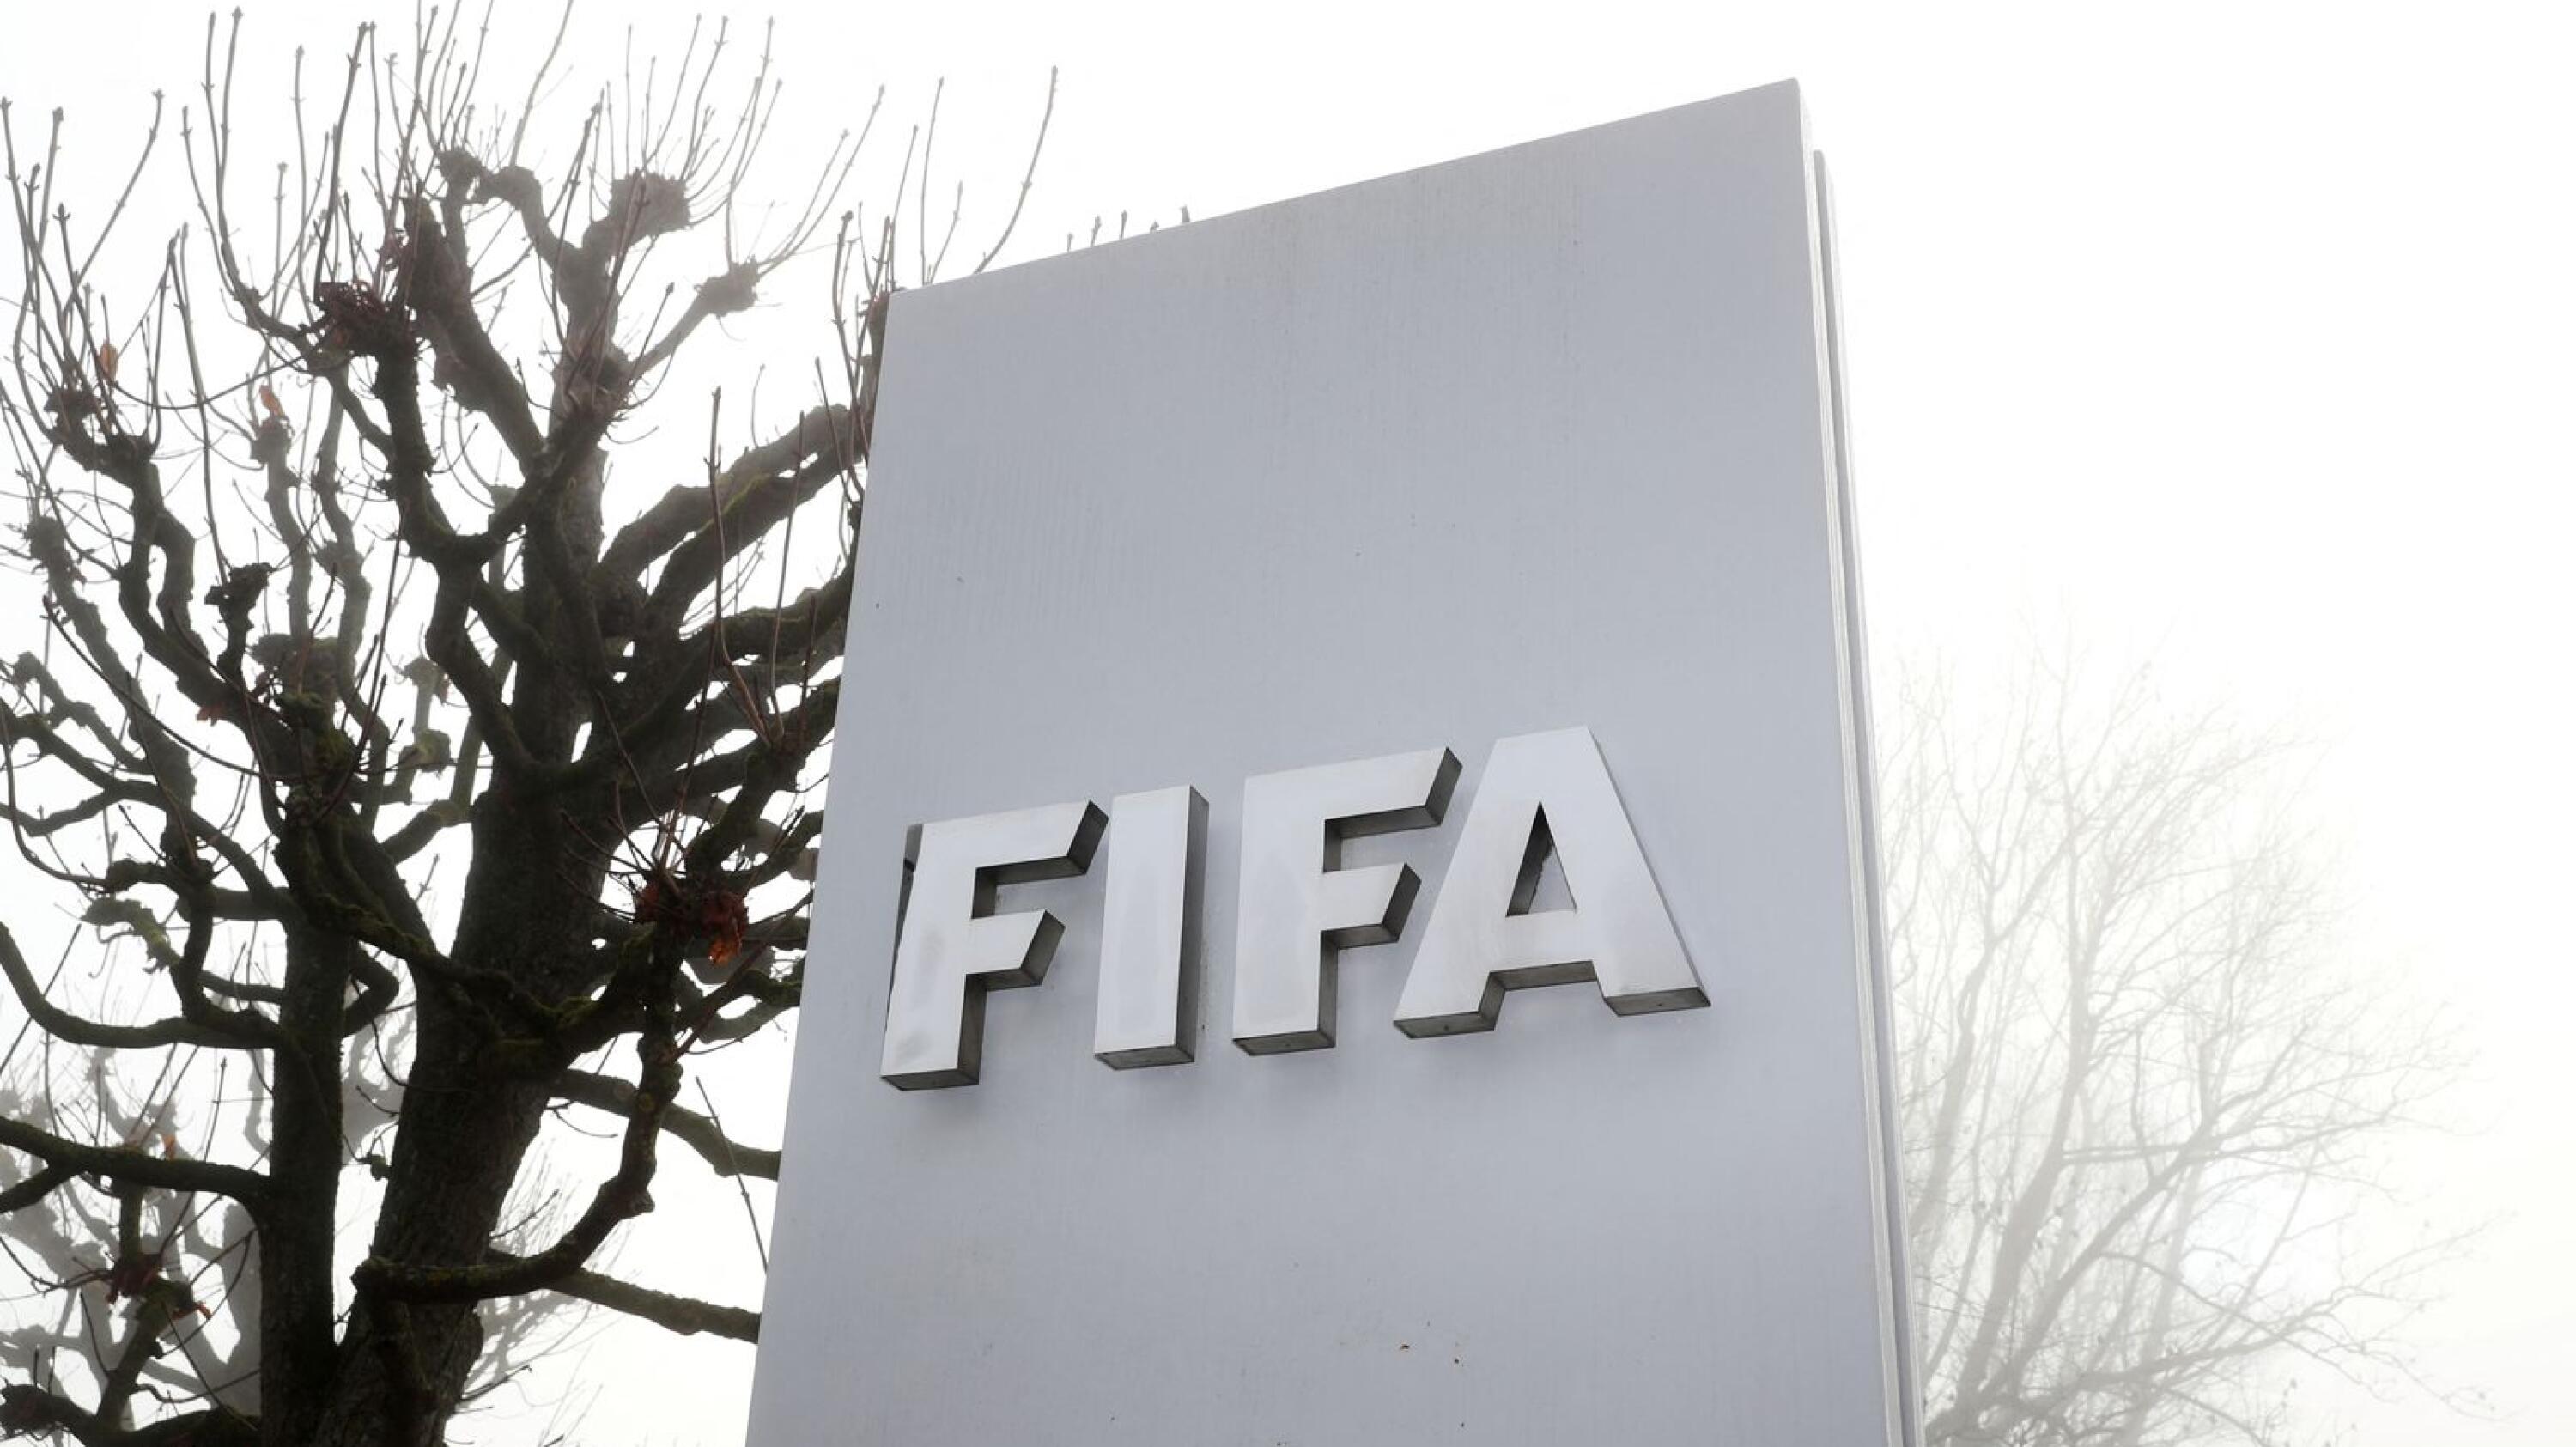 Fifa said Indonesia would no longer host the U20 World Cup ‘due to current circumstances’